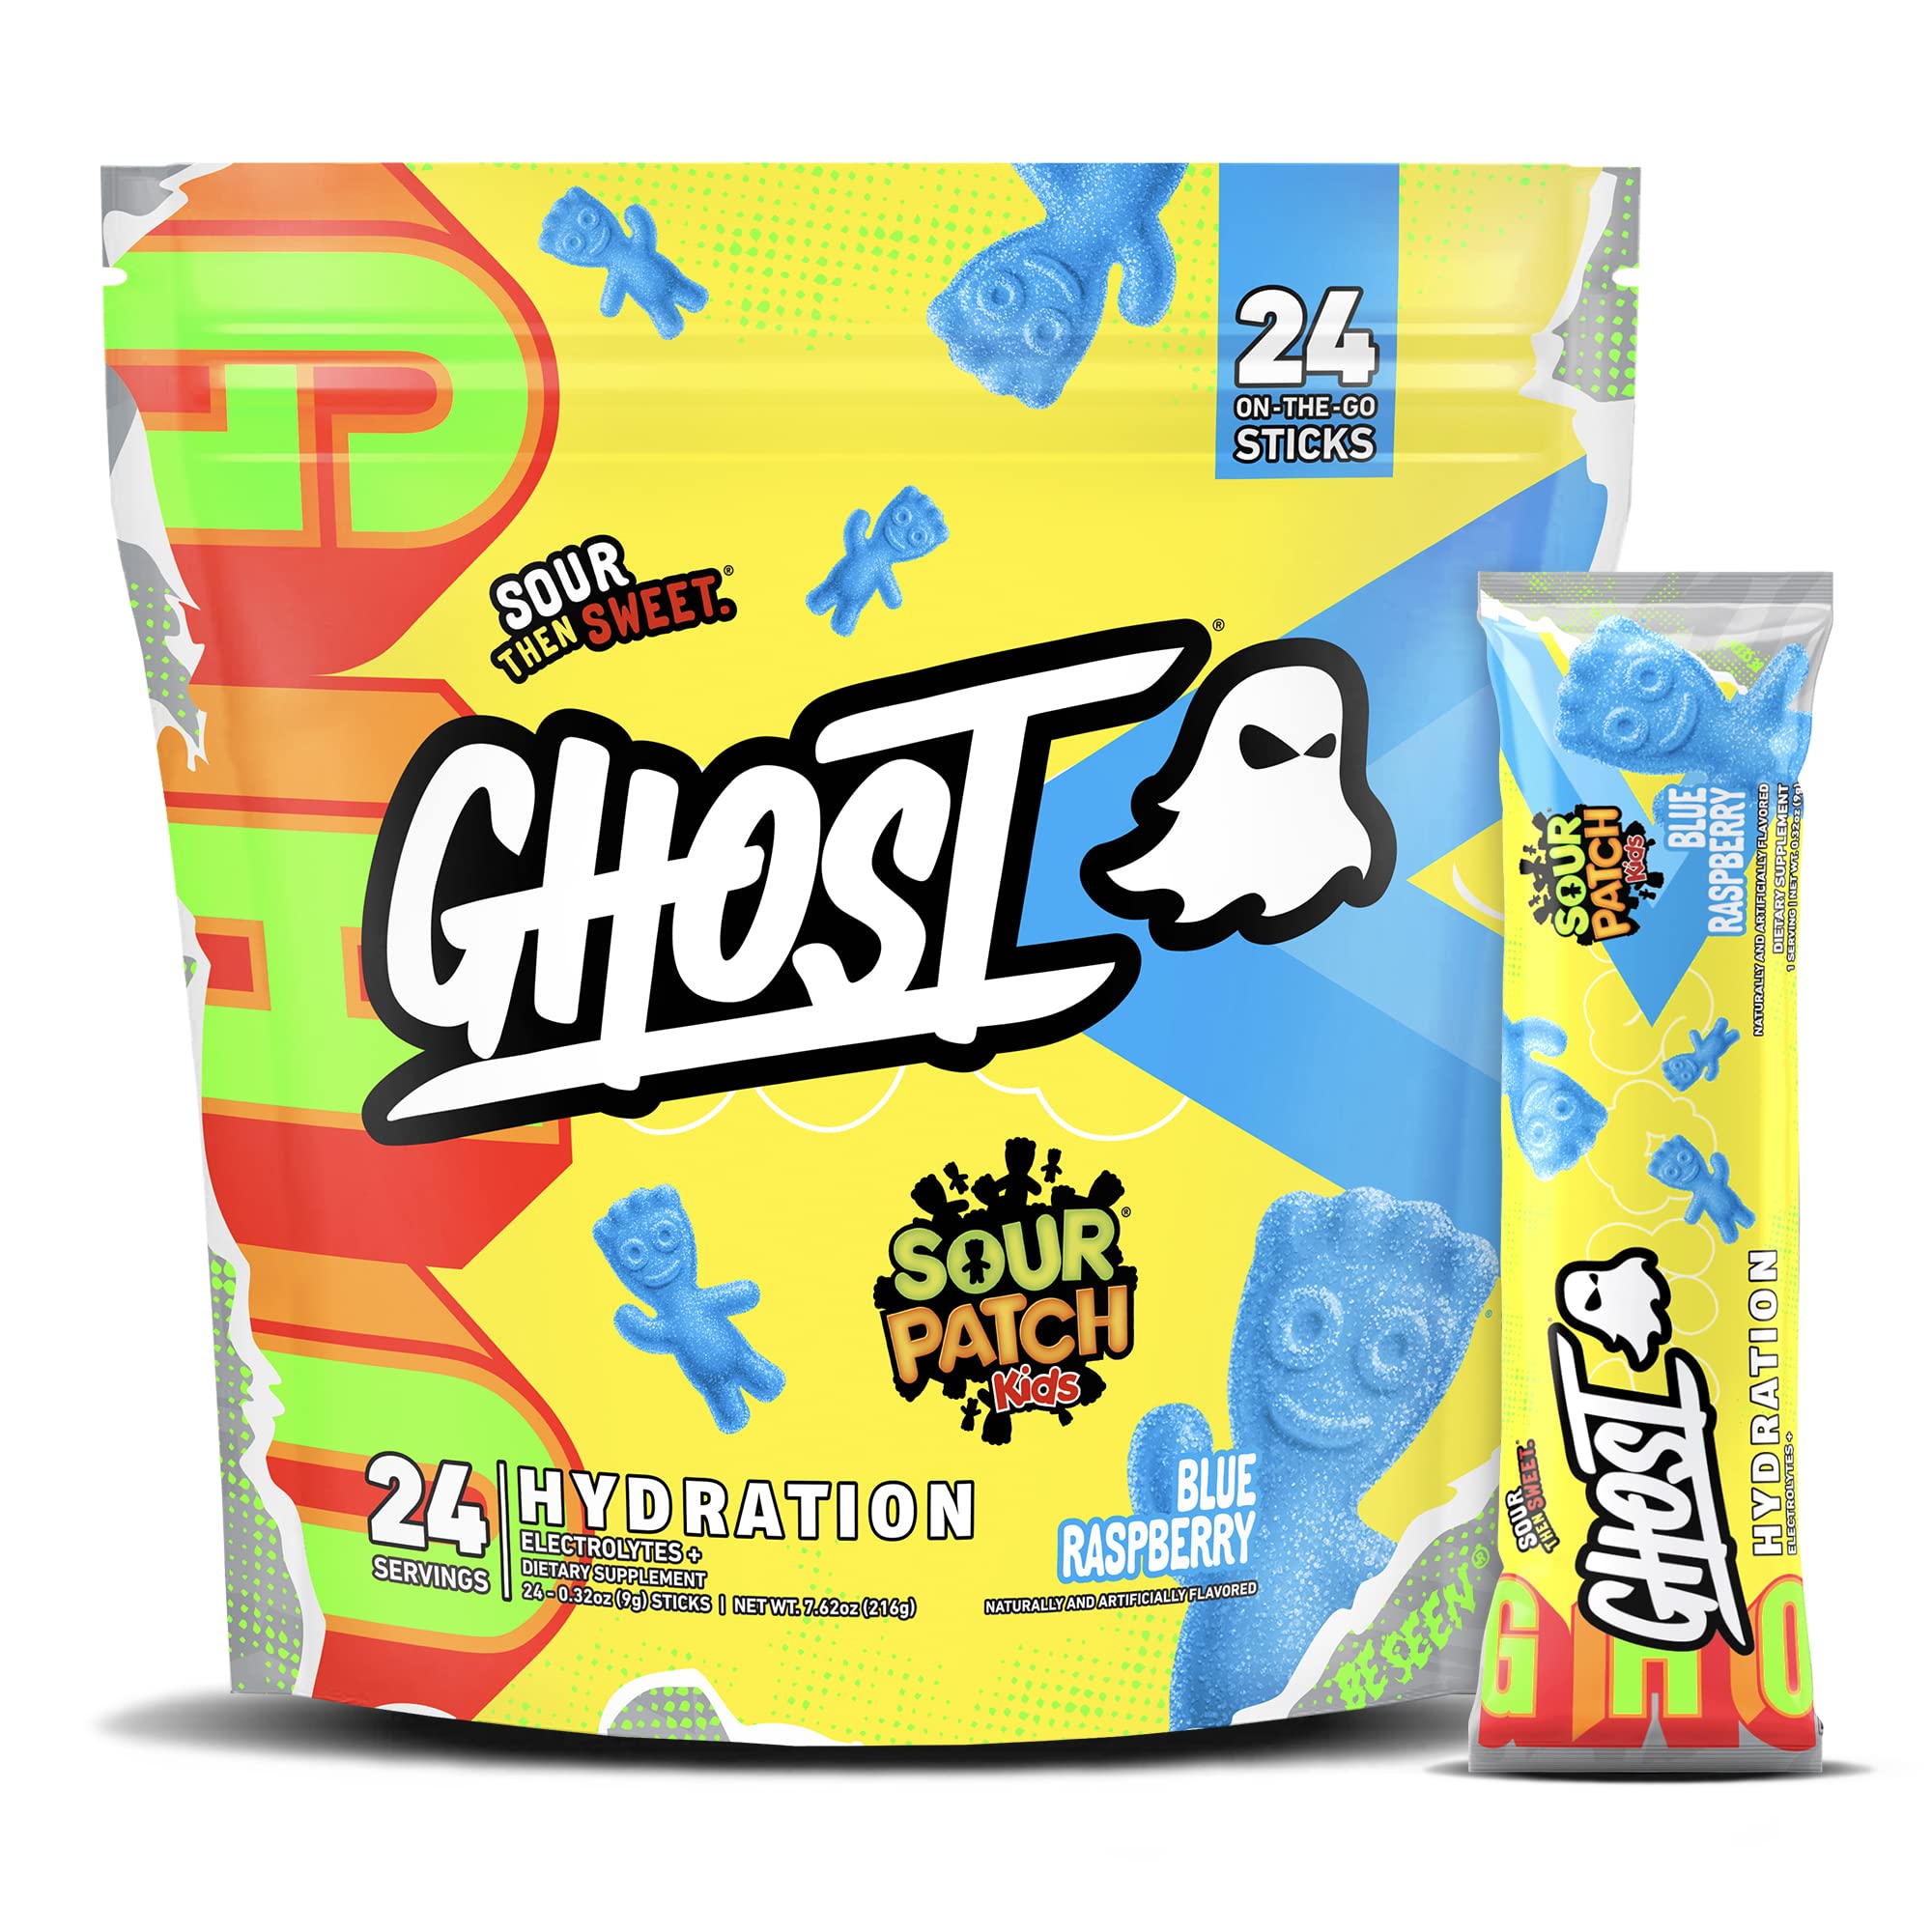 GHOST® LEGEND® ALL OUT Pre-Workout - Blue Raspberry - 14.1 oz